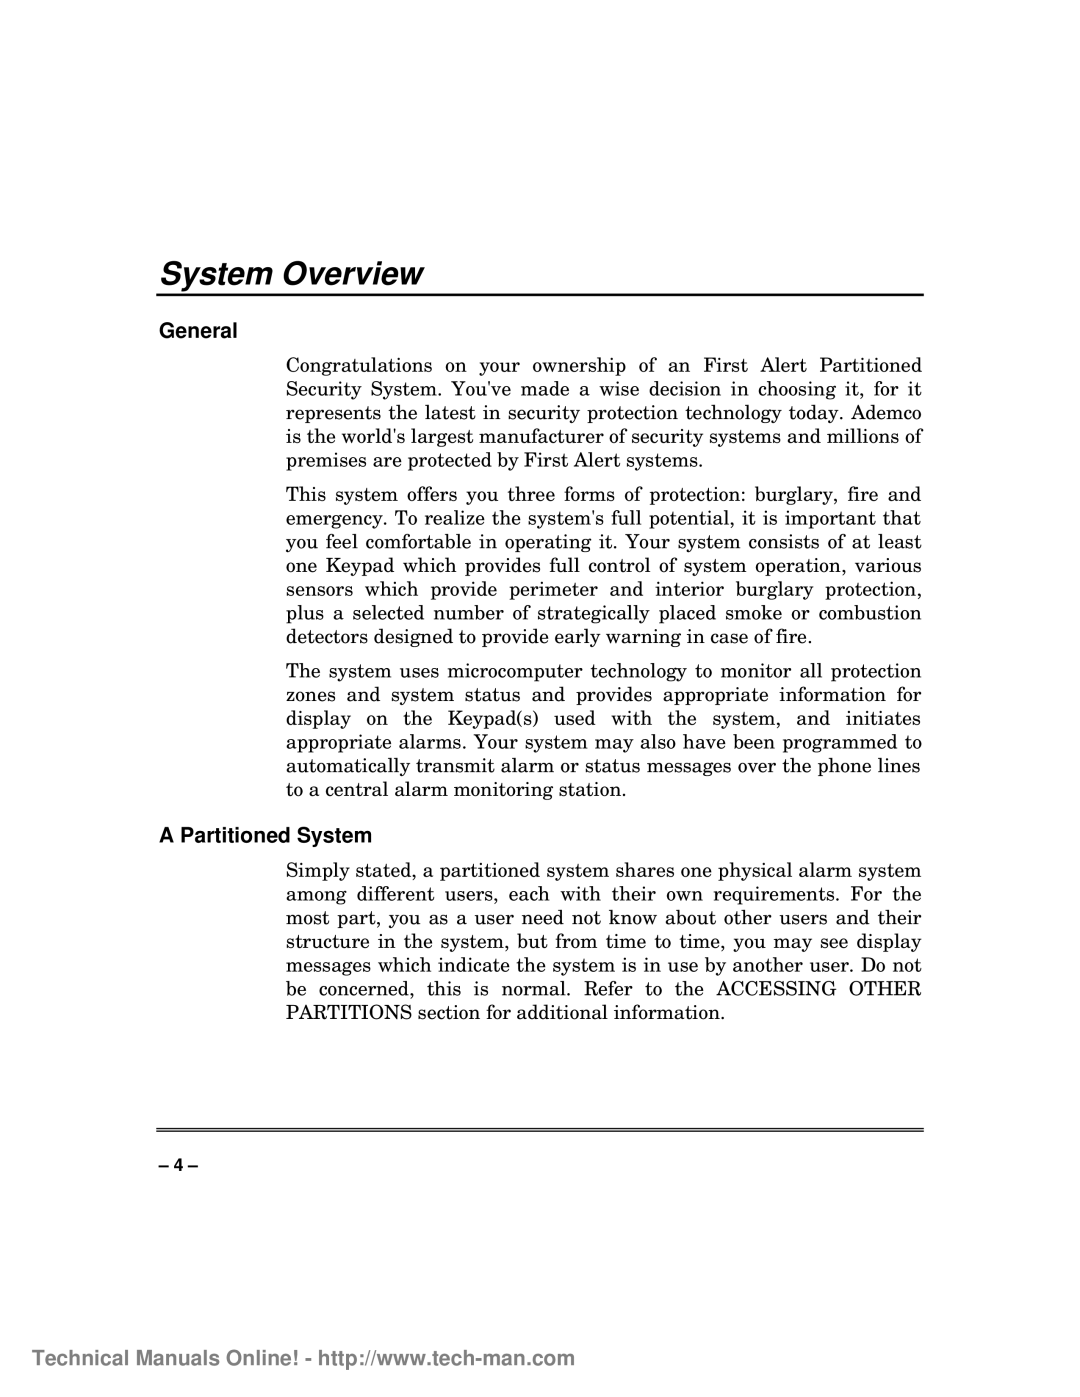 First Alert fa1600c, FA1600C/CA/CB technical manual System Overview, General, A Partitioned System 